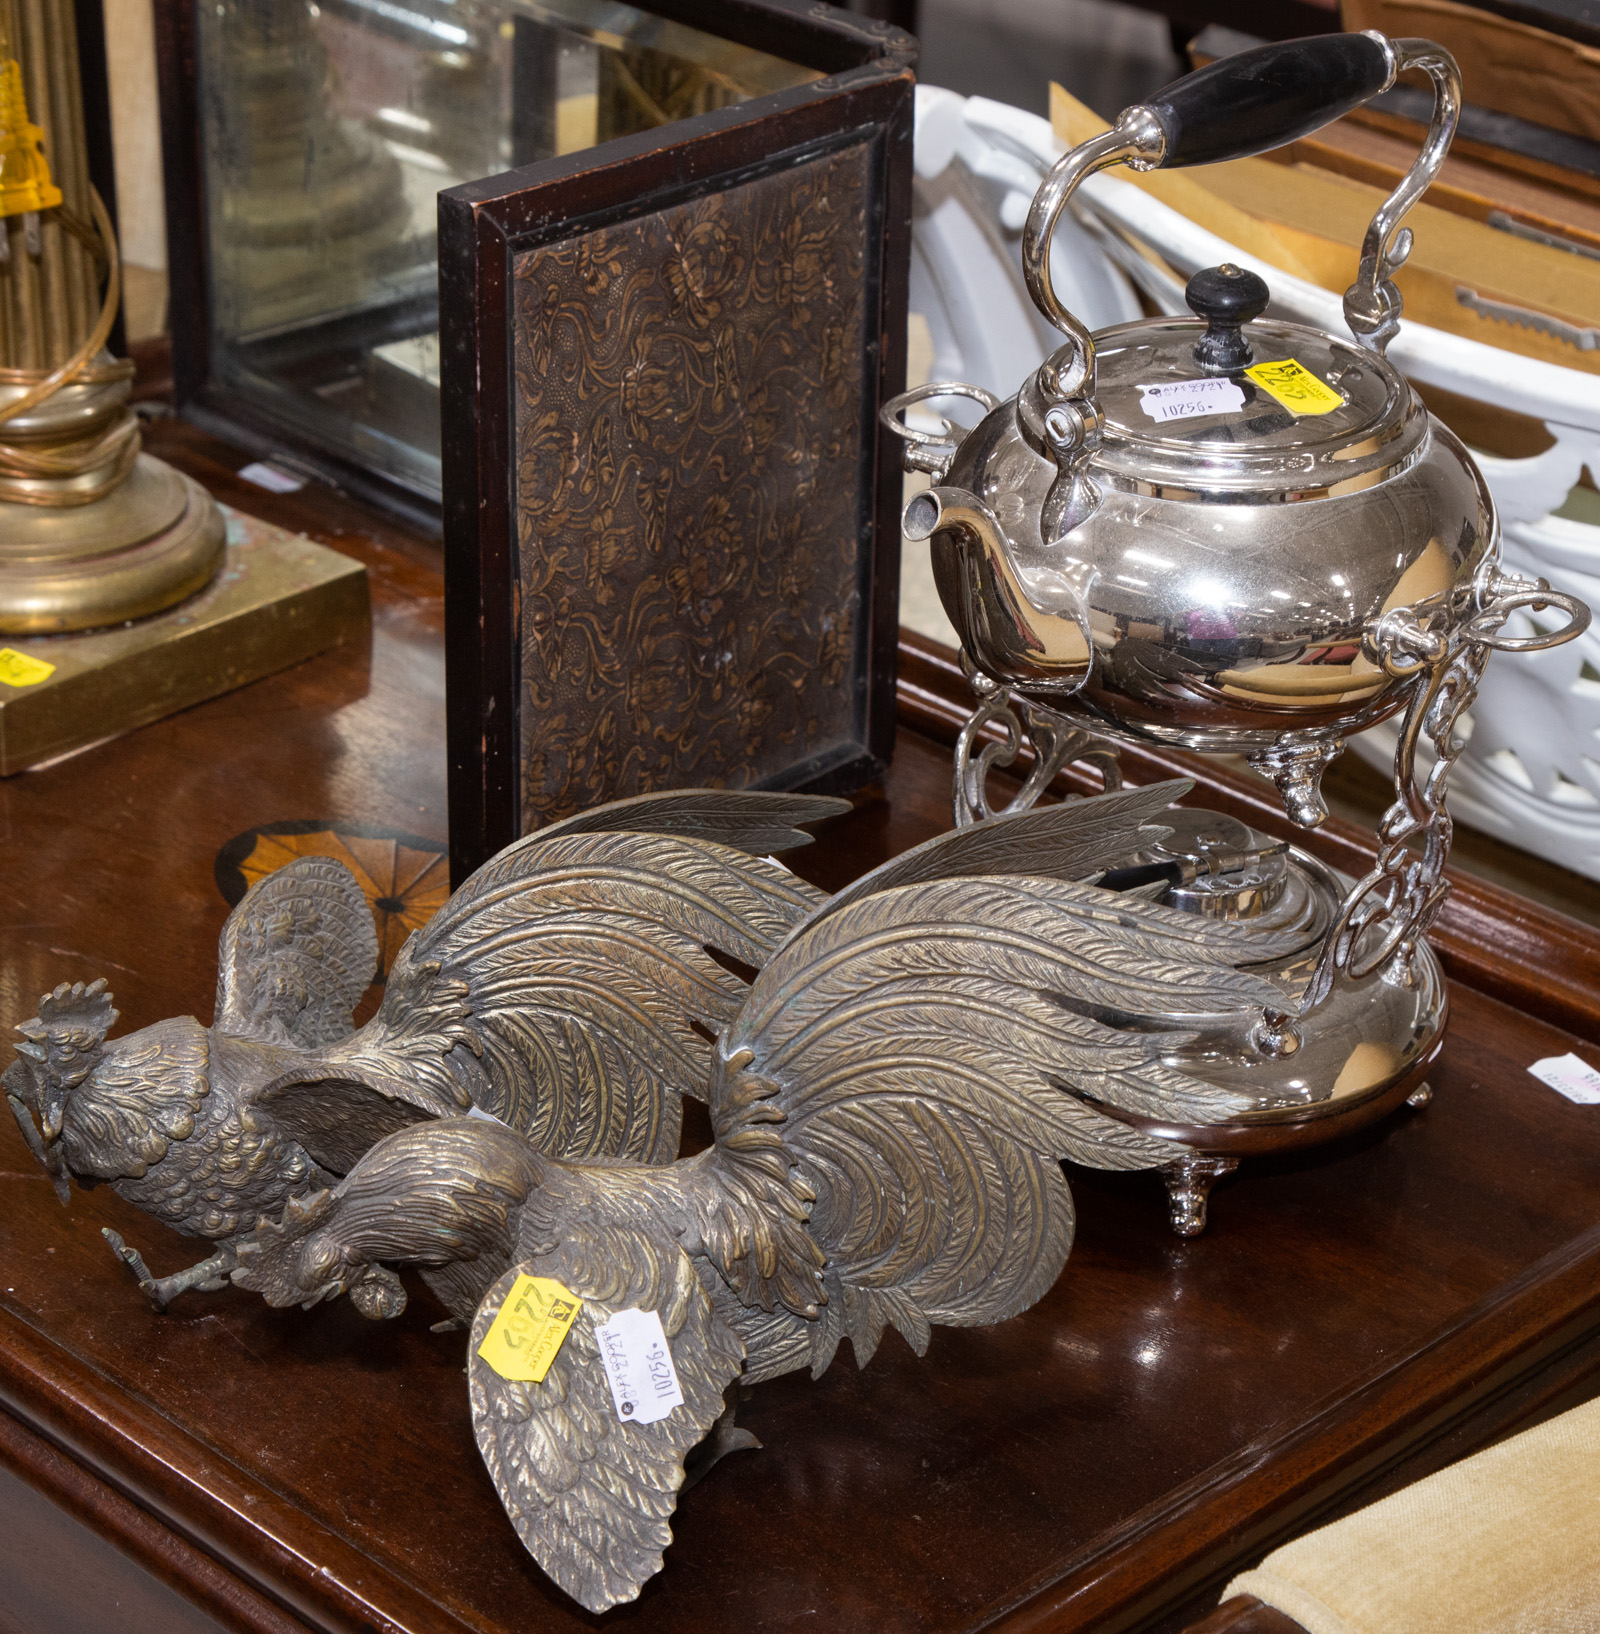 TWO DECORATIVE METAL ROOSTERS  33517d